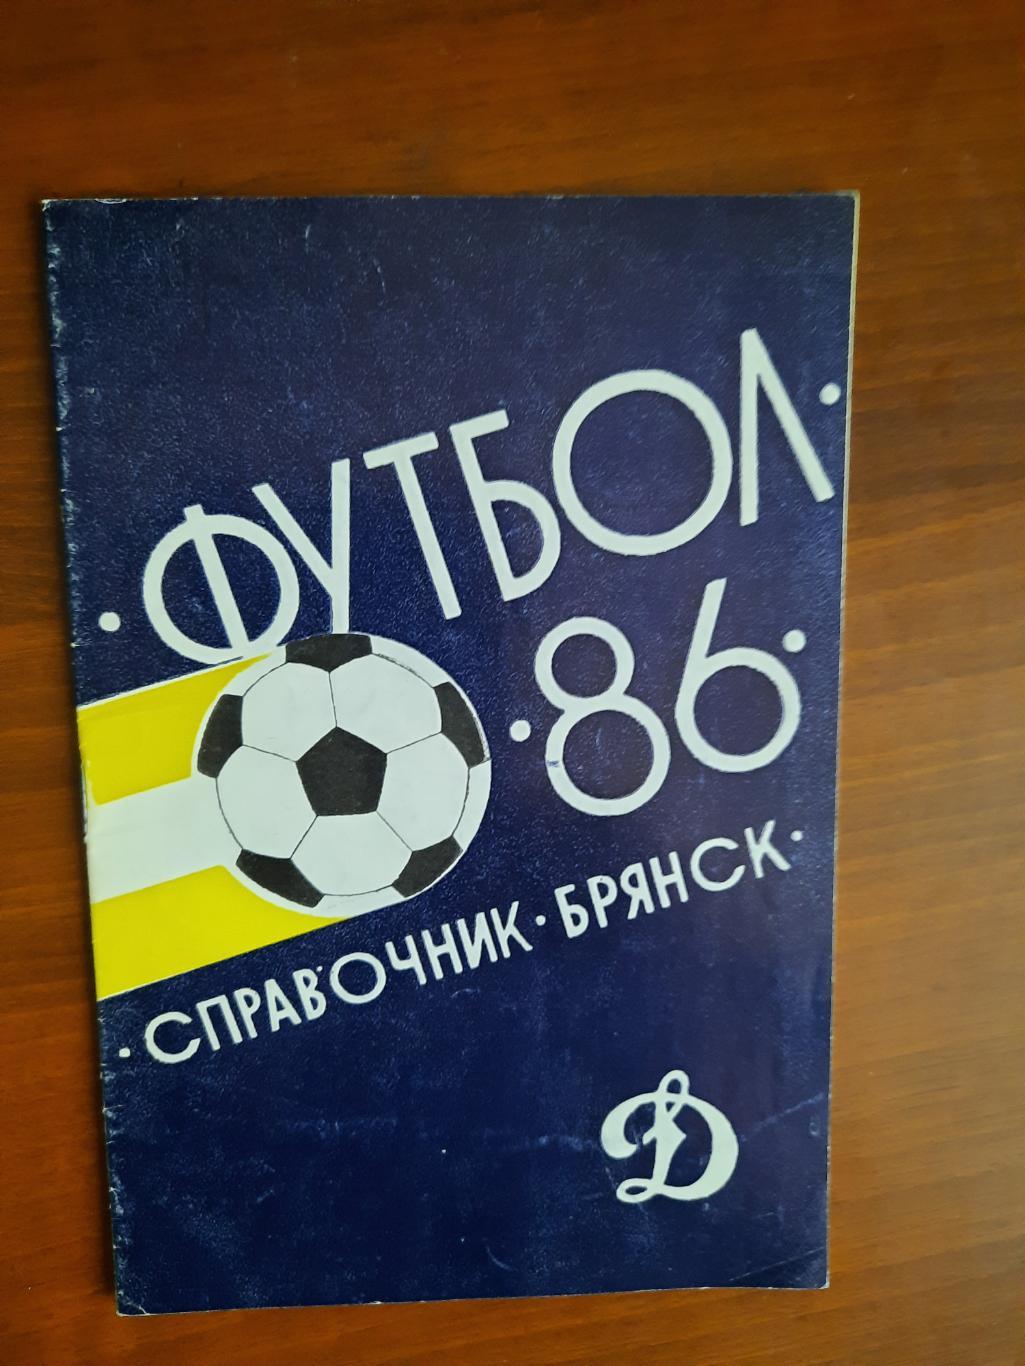 Брянск 1986